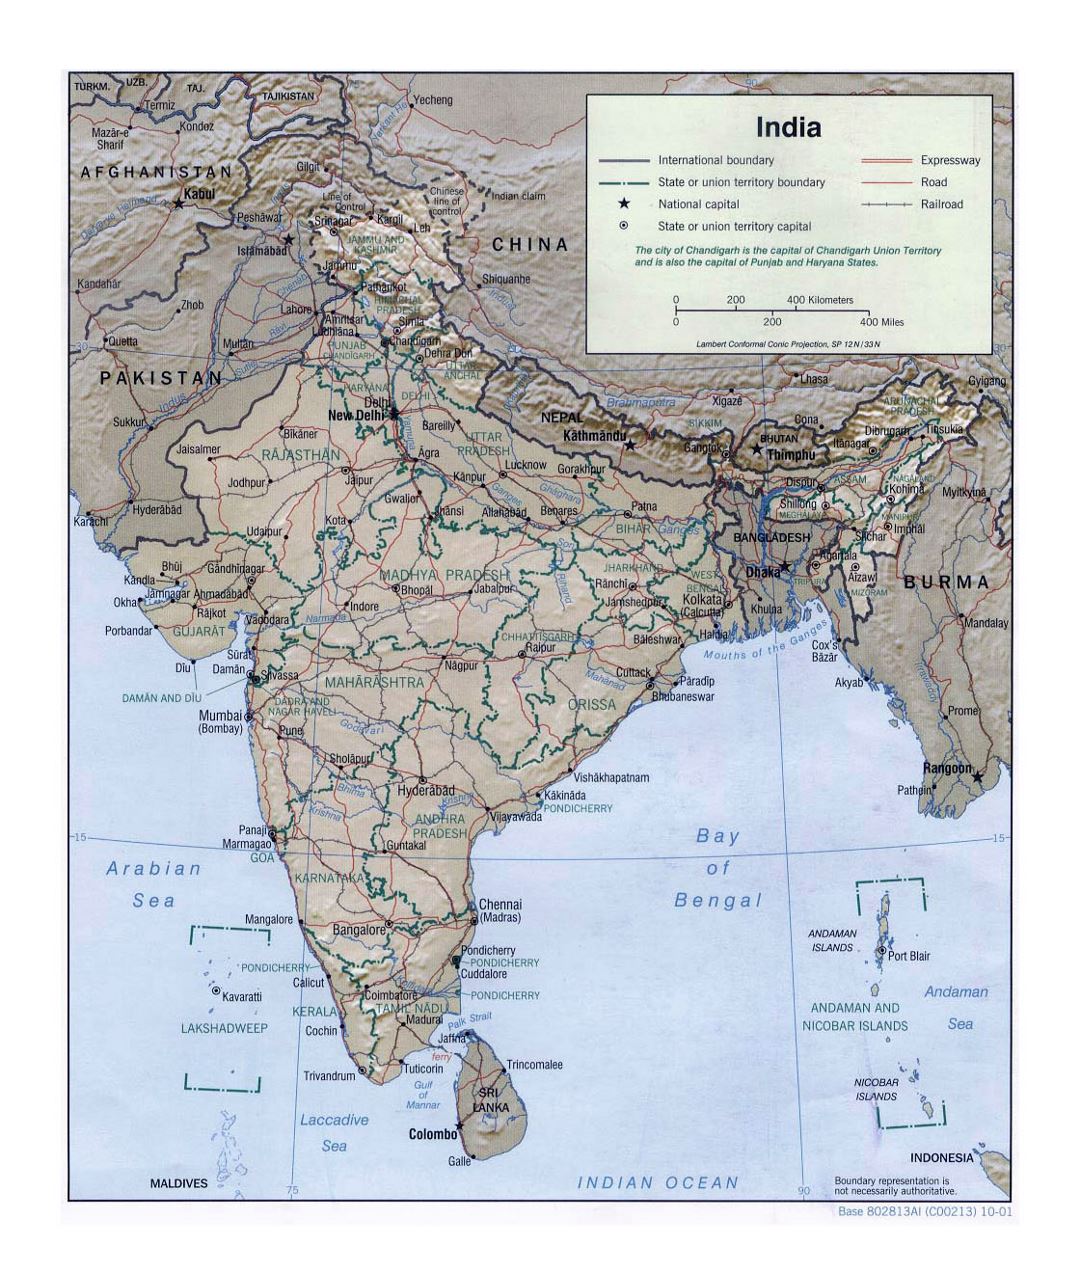 Large political and administrative map of India with relief, roads, railroads and major cities - 2001